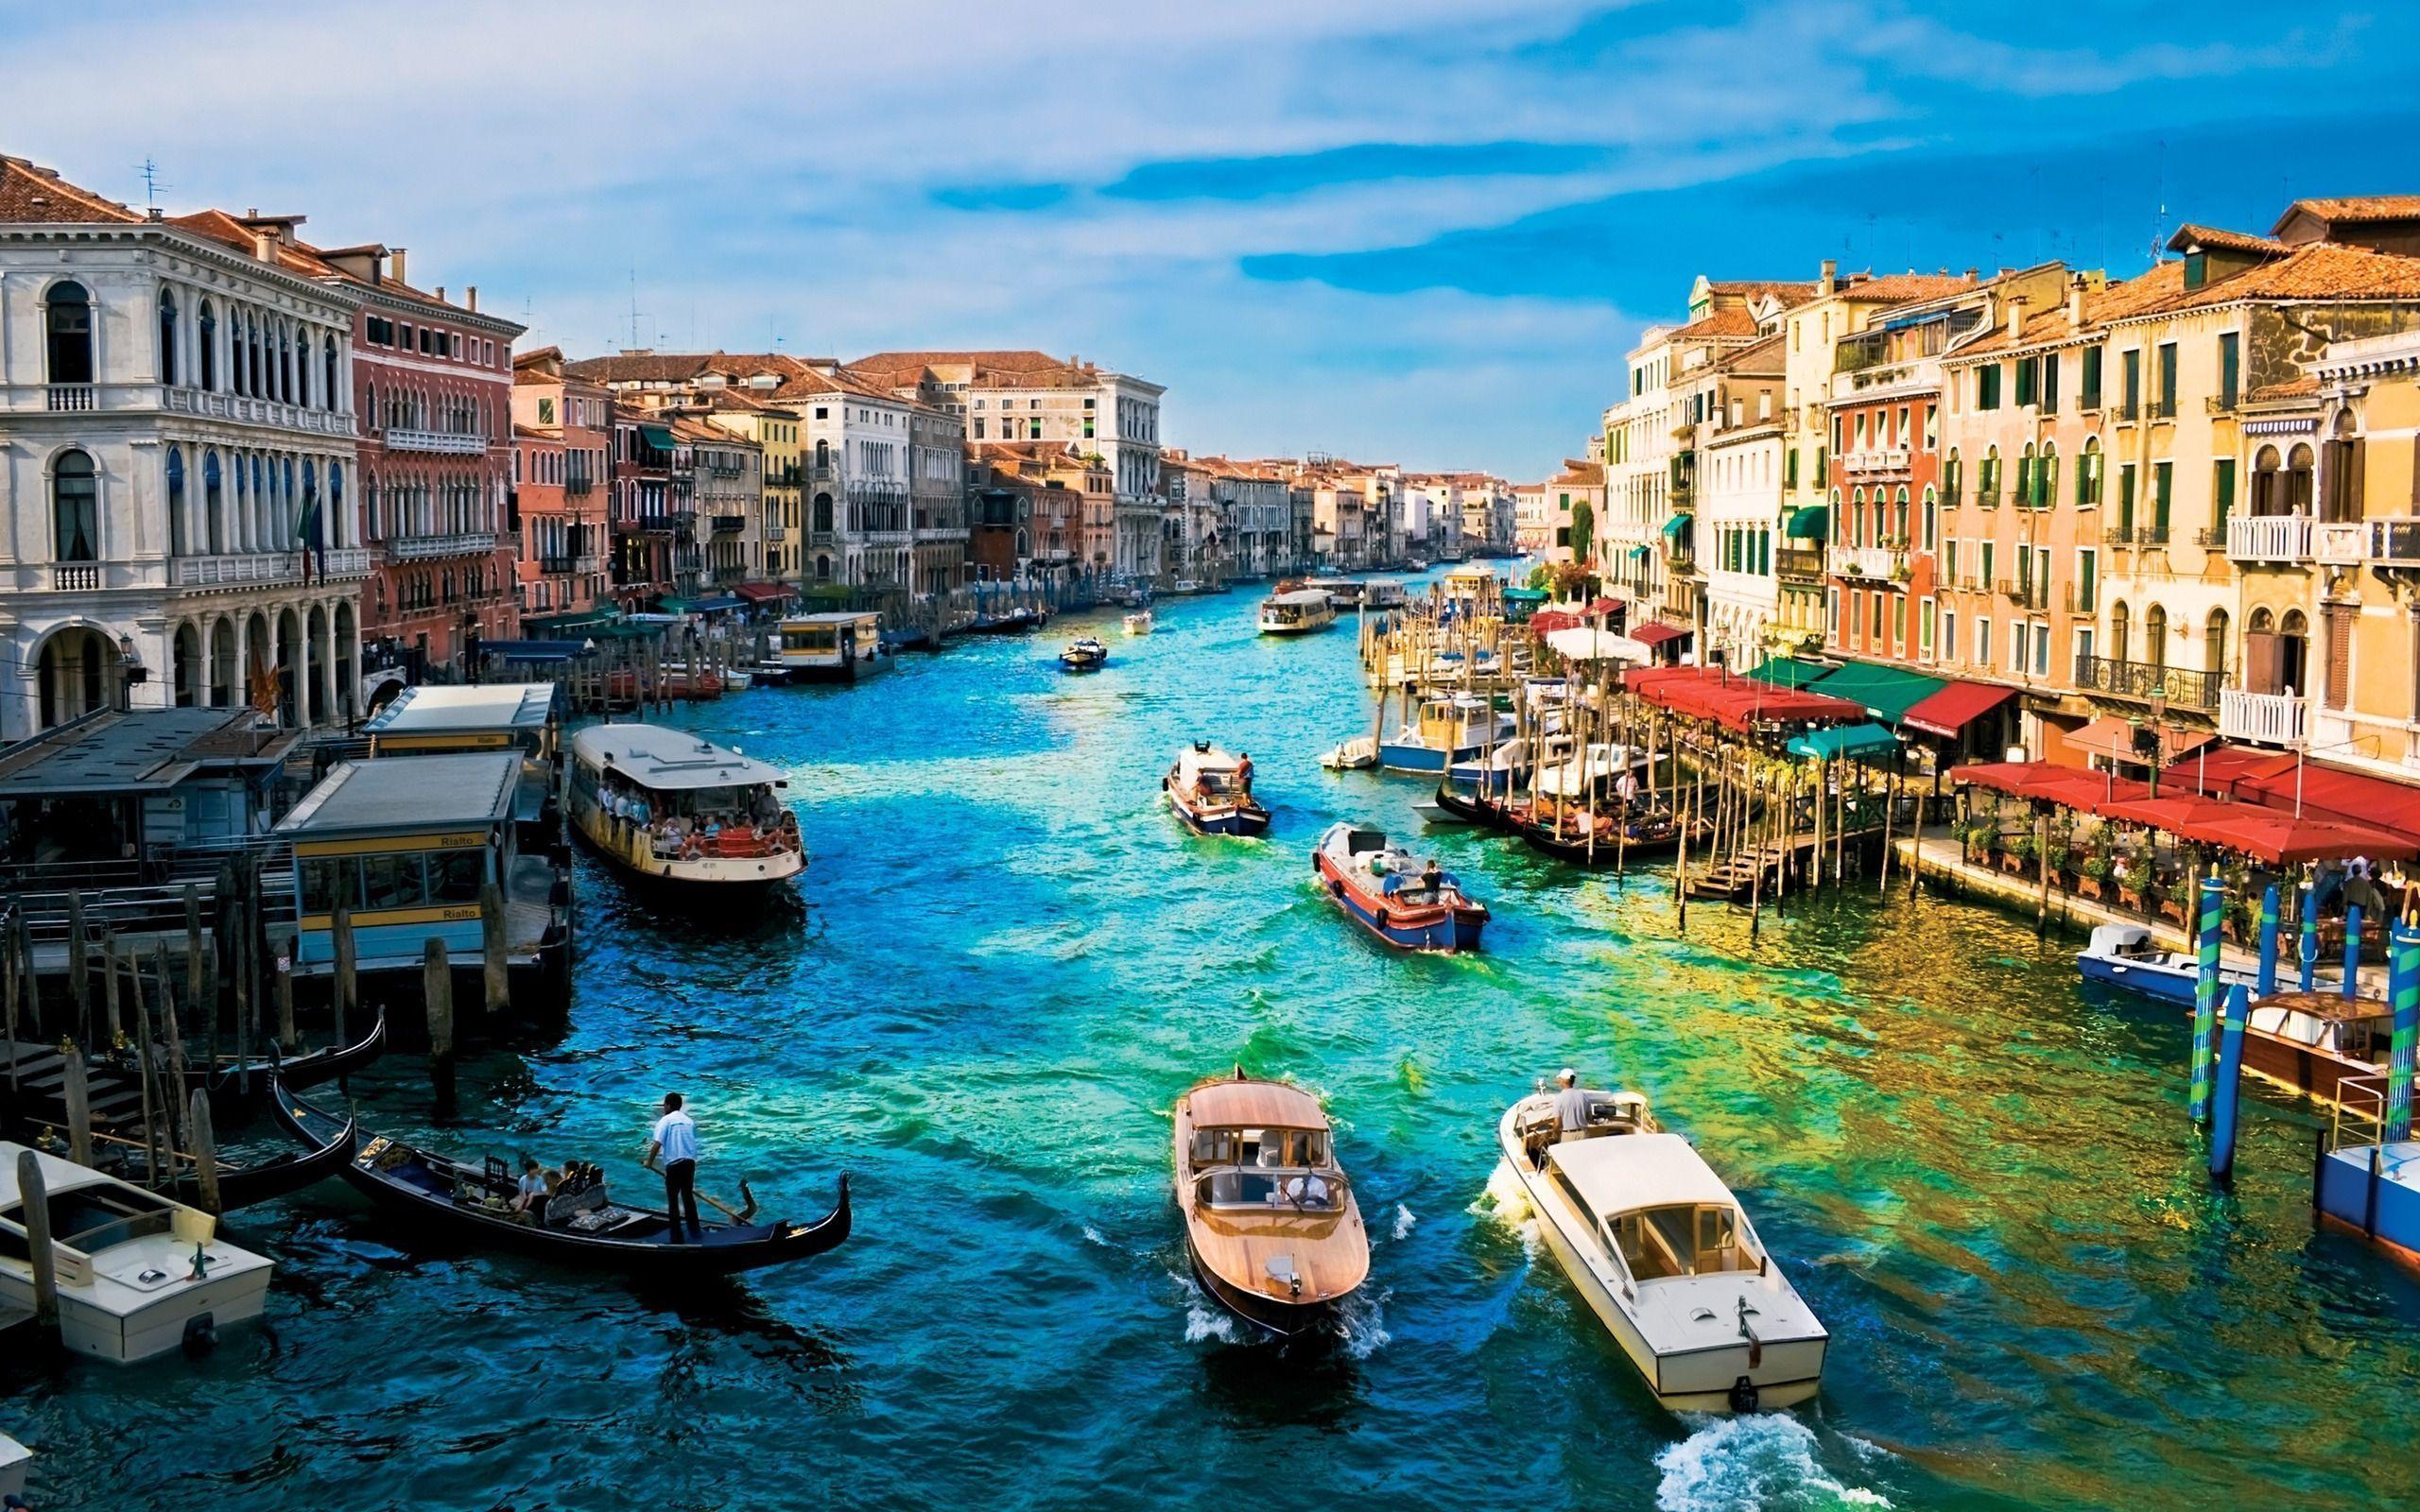 Venice Italy Wallpaper Cool Image g002